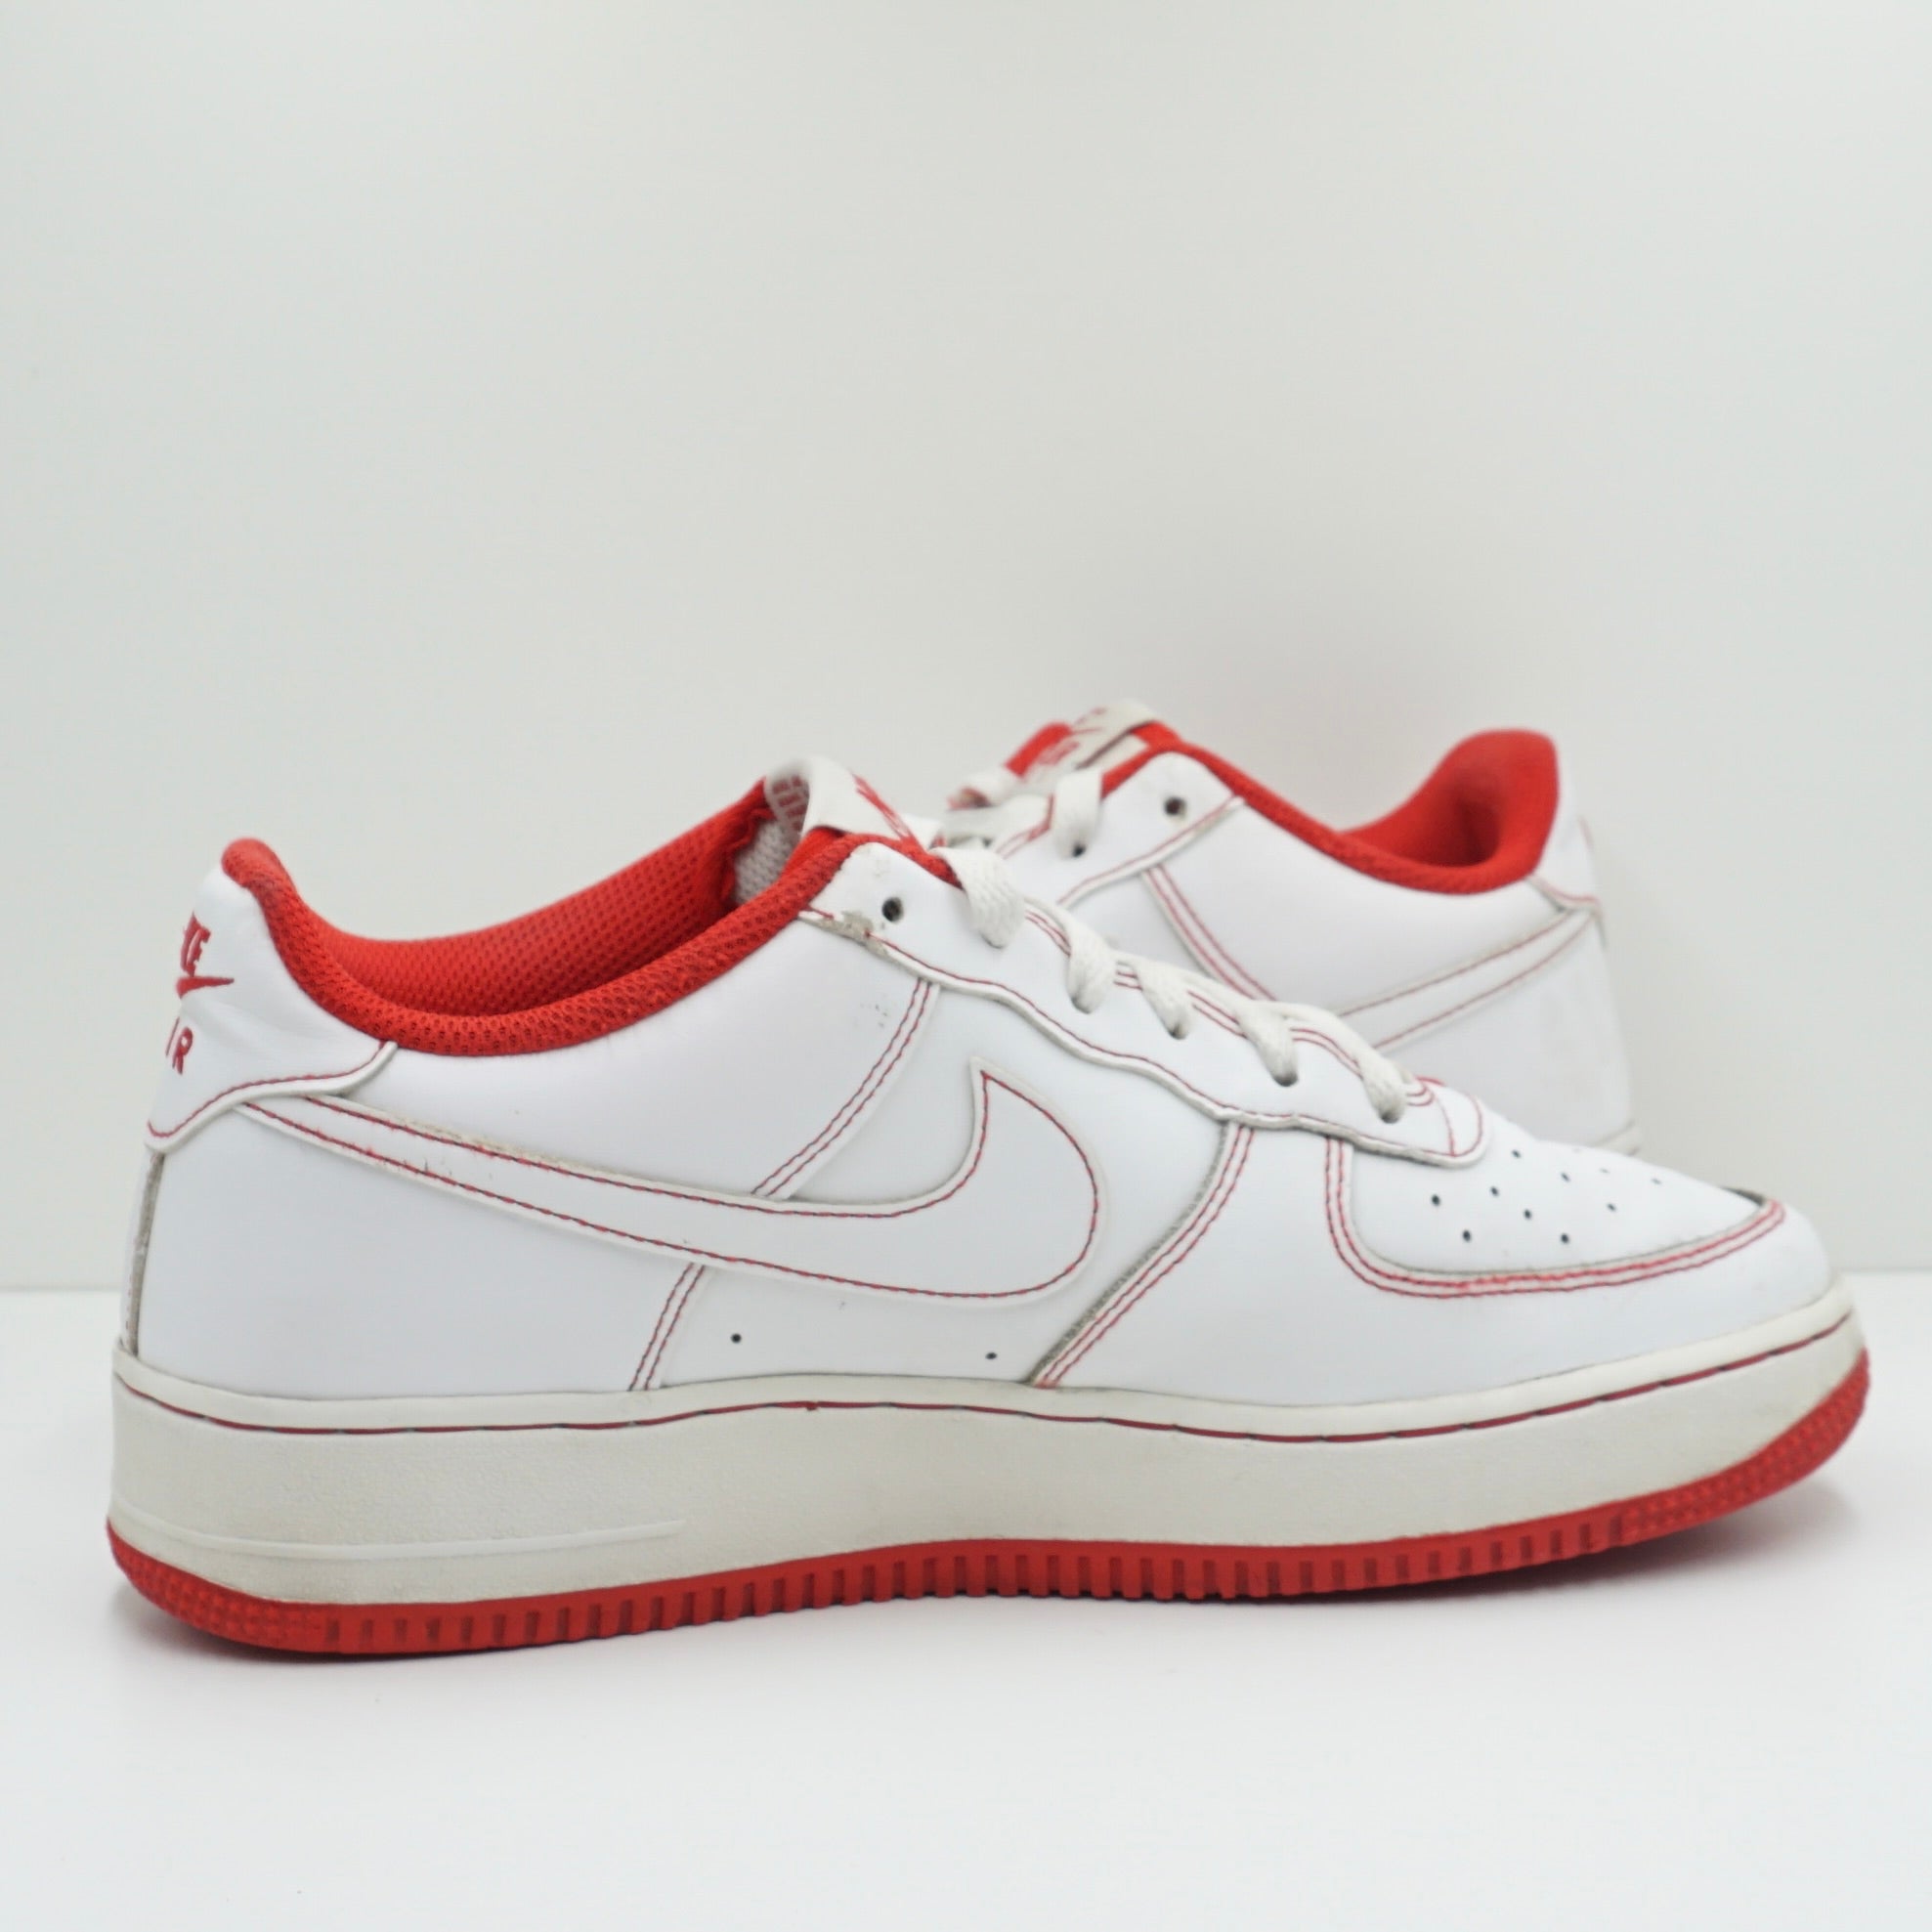 Nike Air Force 1 Low University Red (GS)